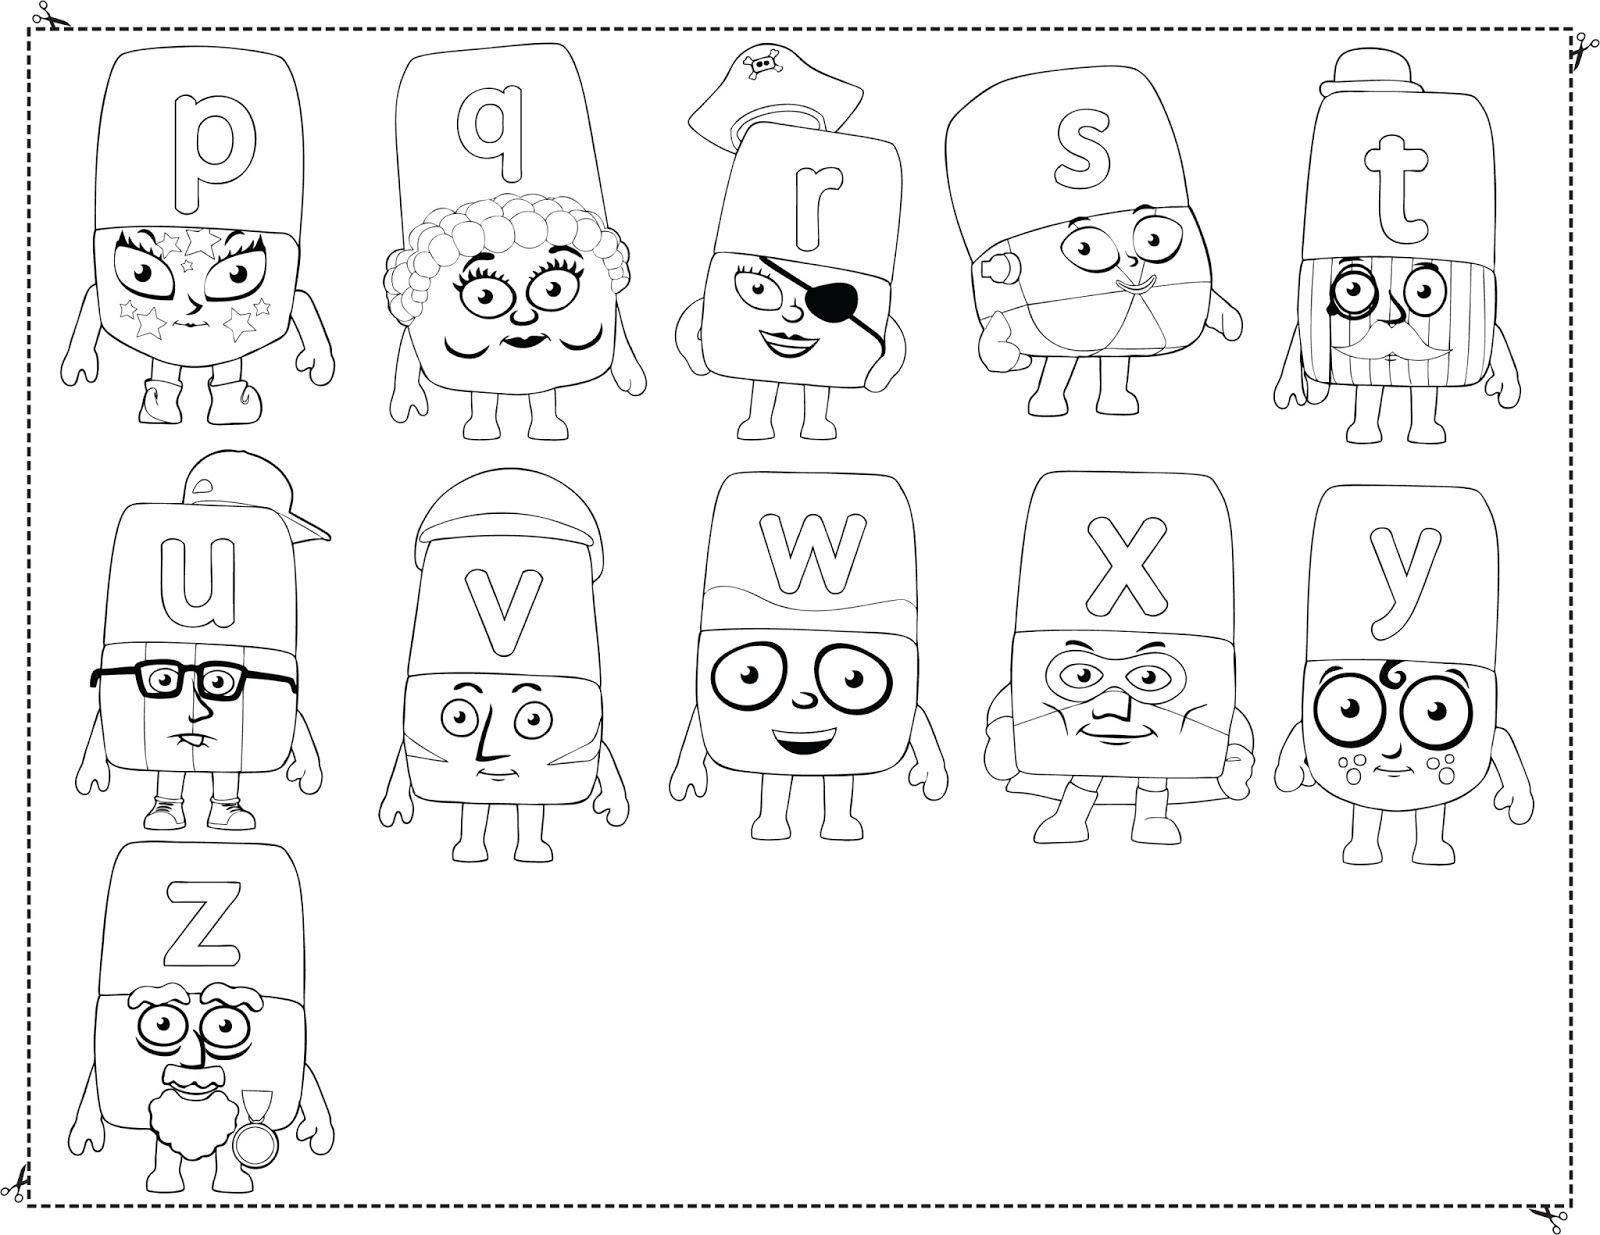 Let's Have Fun with Alphablocks Coloring Pages Pdf - Alphablocks From P to Z Coloring Pages